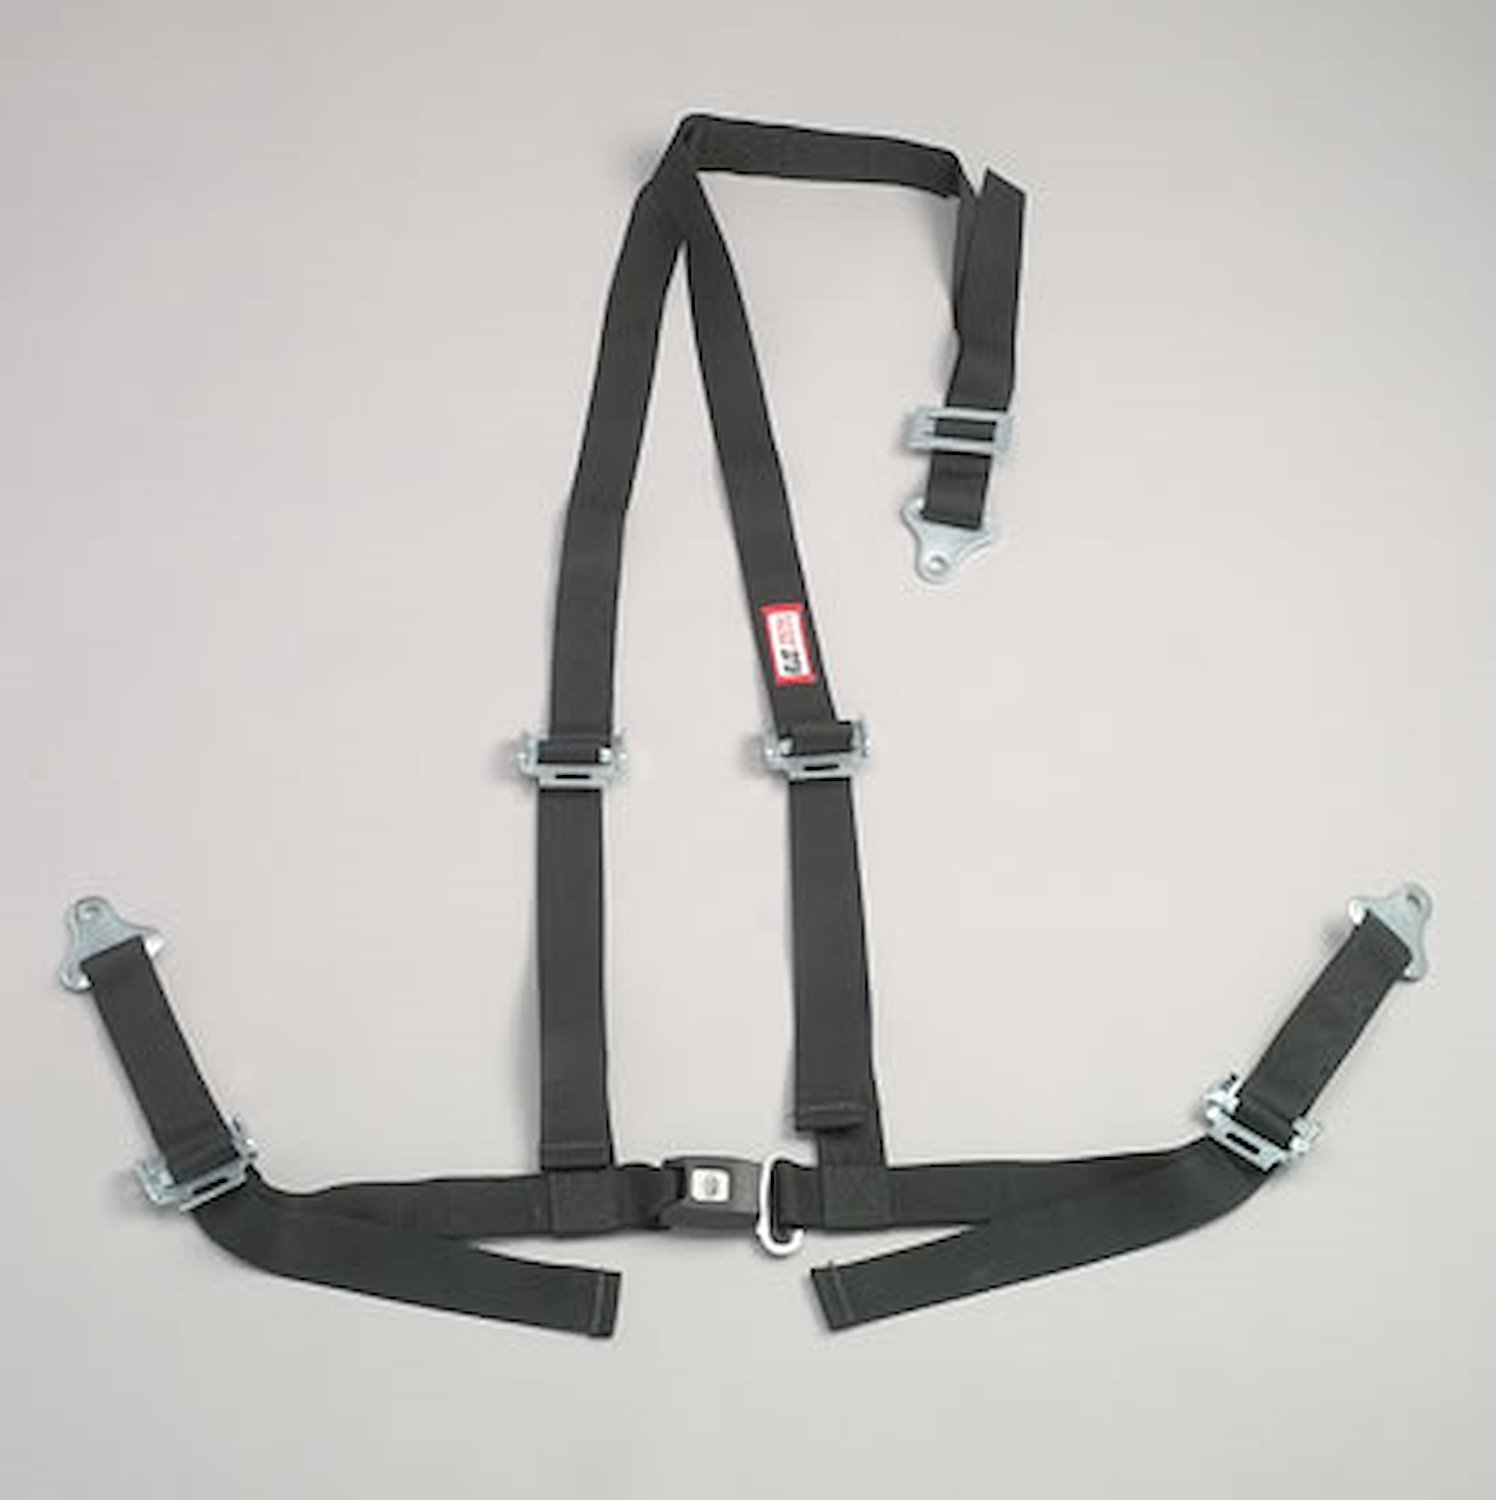 NON-SFI B&T HARNESS 2 PULL UP Lap Belt SNAP 2 S. H. Y FLOOR Mount WRAP/SNAP YELLOW